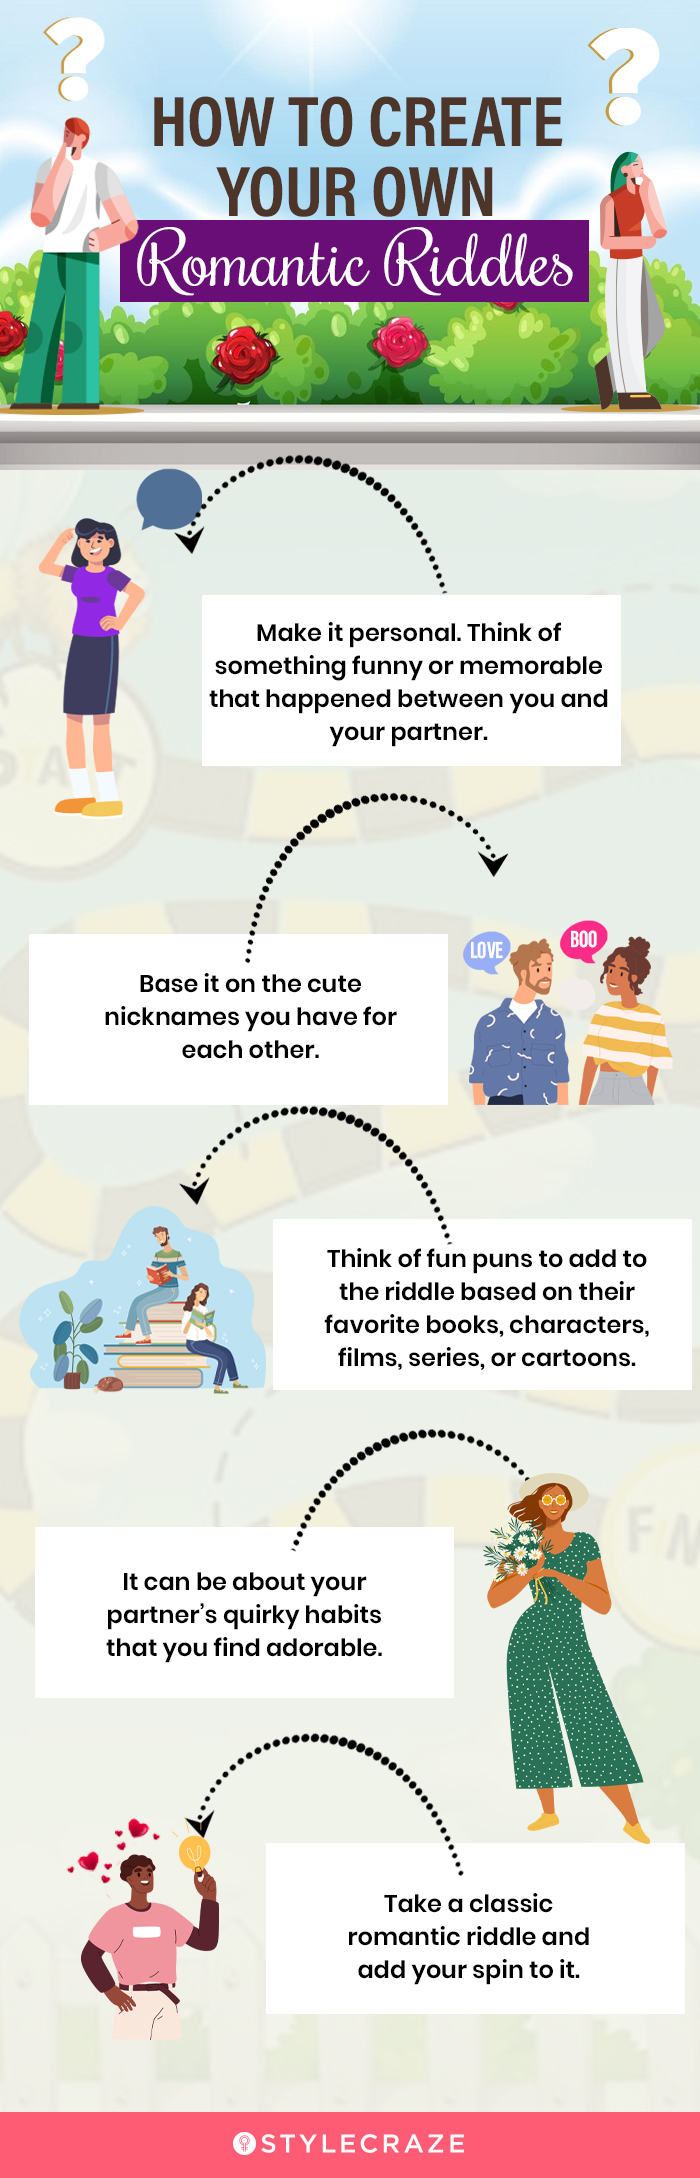 how to create your own romantic riddles [infographic]